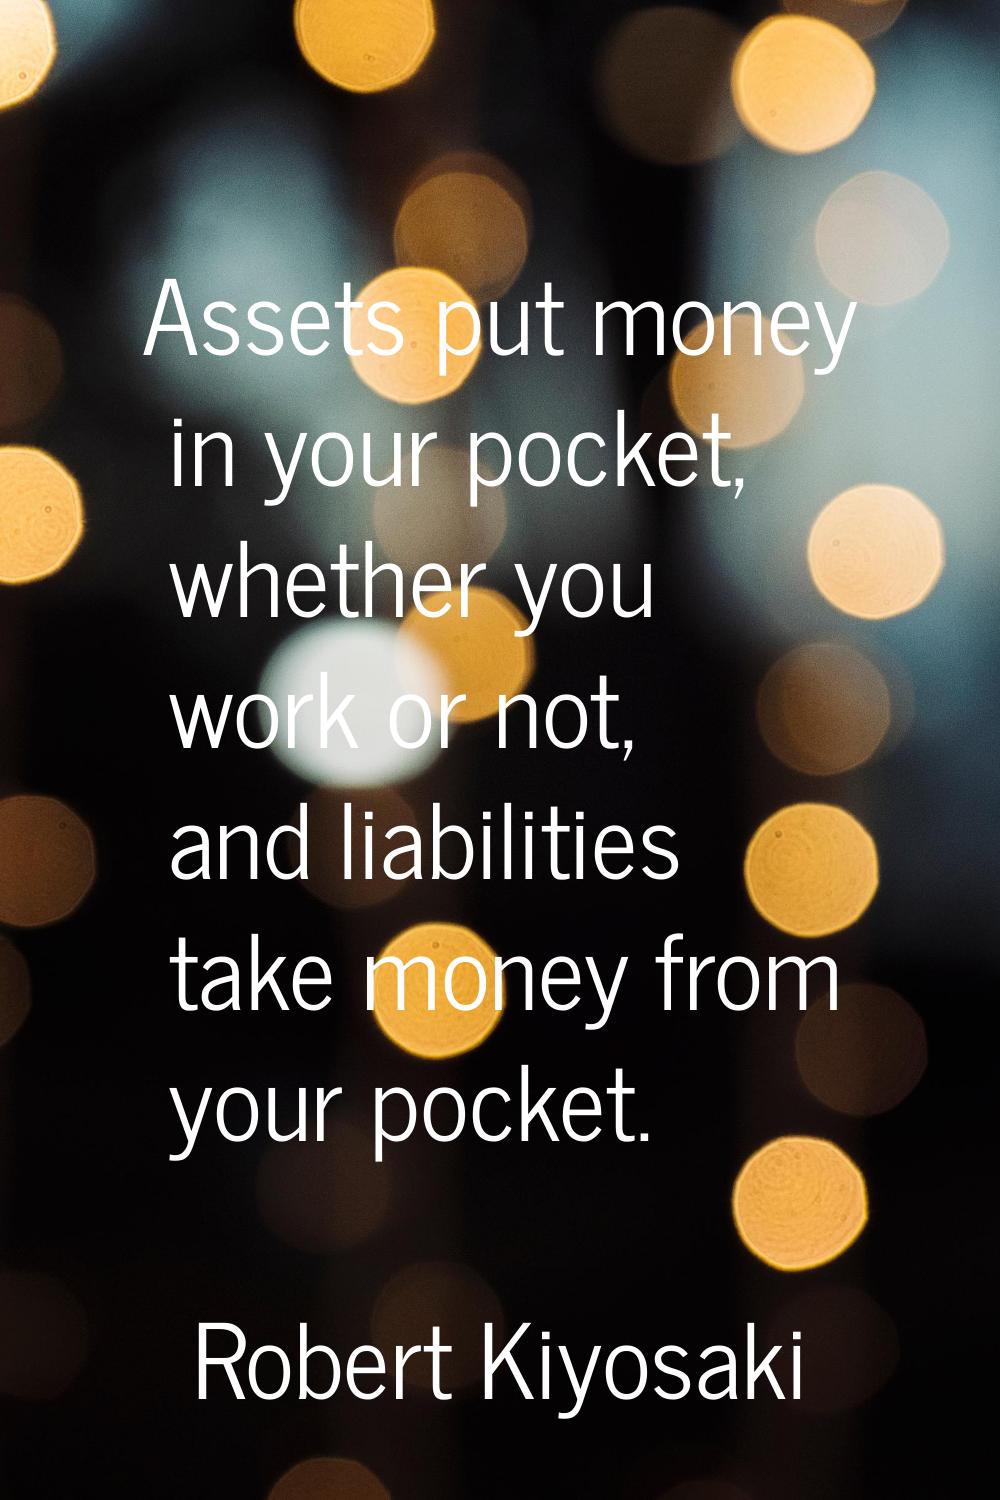 Assets put money in your pocket, whether you work or not, and liabilities take money from your pock